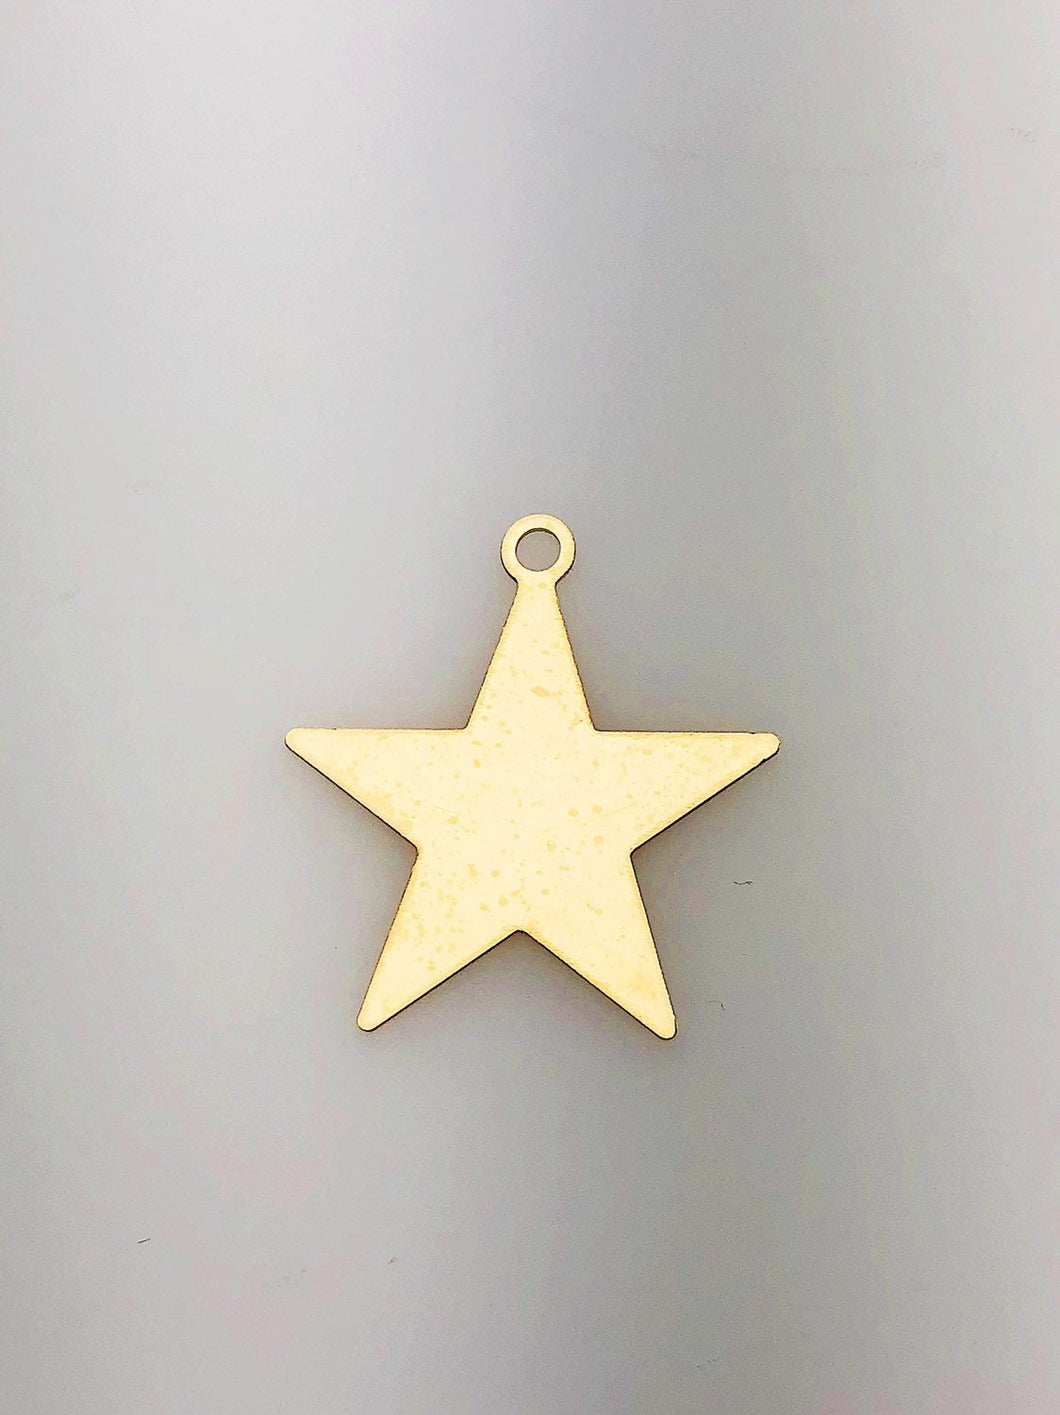 14K Gold Fill Star Tag Charm w/ Ring, 24.3mm, Made in USA - 2373